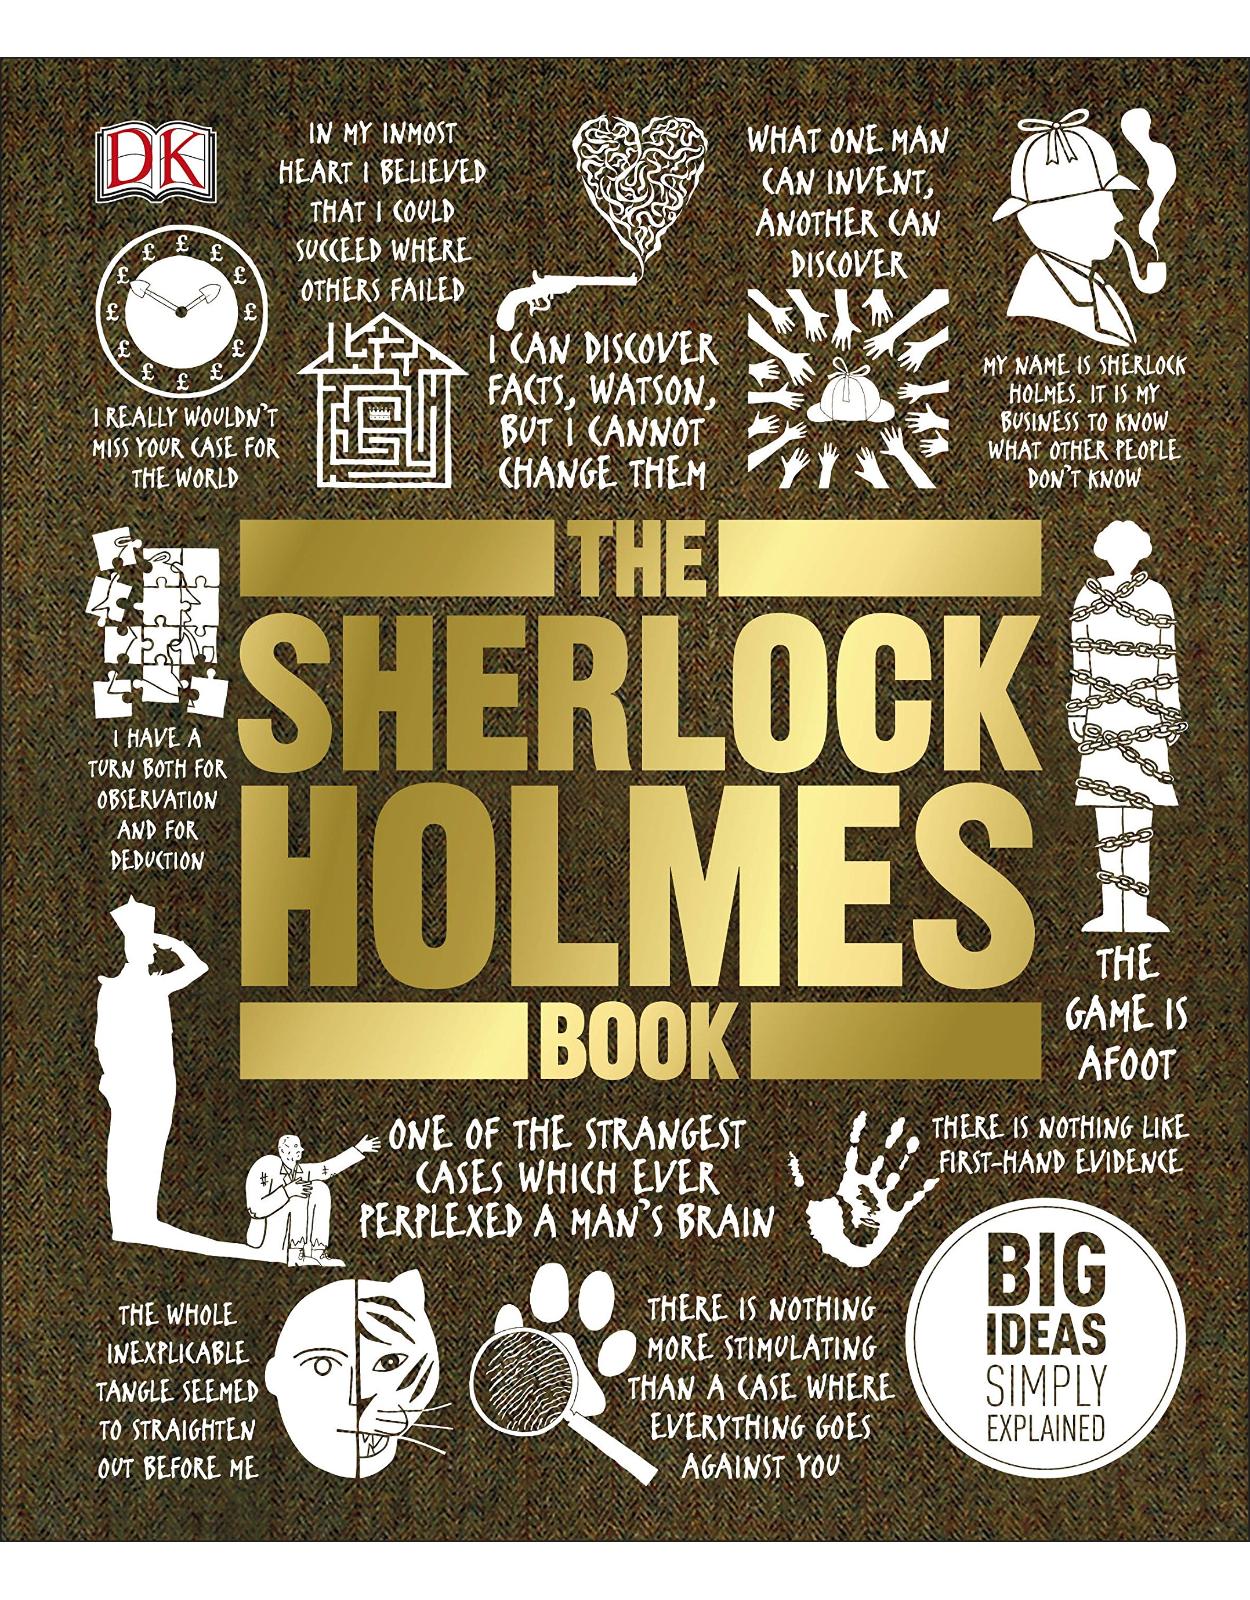  The Sherlock Holmes Book: Big ideas simply explained